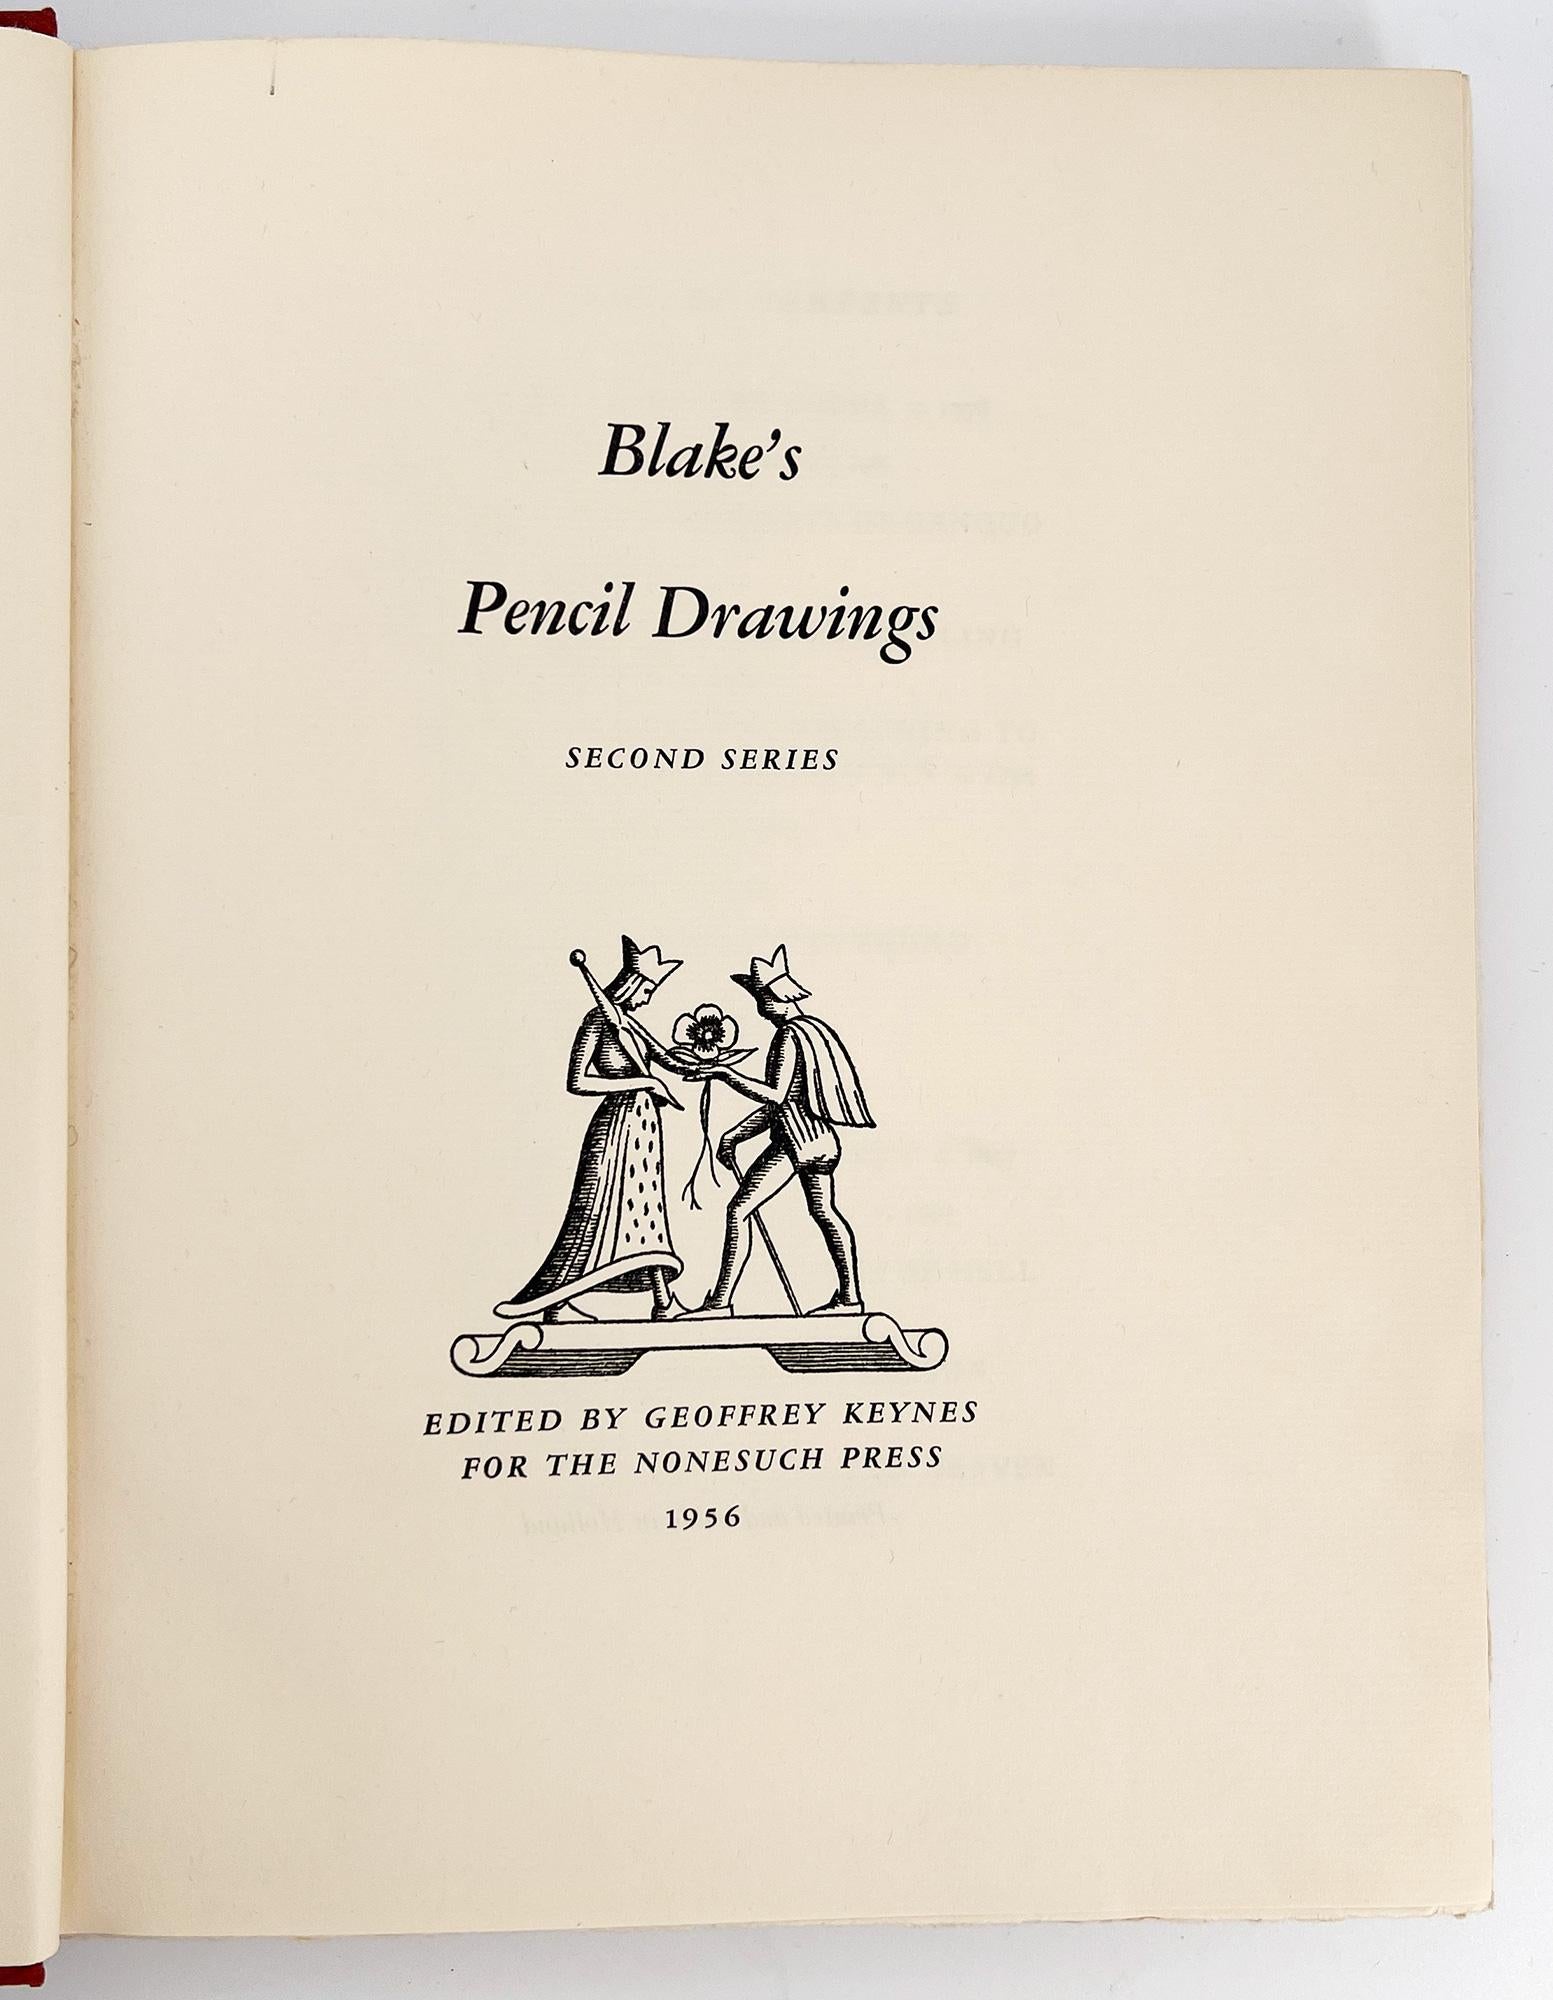 This is the sequel to The Nonesuch Press' first book of Blake's Pencil Drawings, published in 1927. The Max Reinhardt / Nonesuch list 1956 remarked: ‘During the twenty-nine years that have elapsed a number of exciting drawings have come to light,